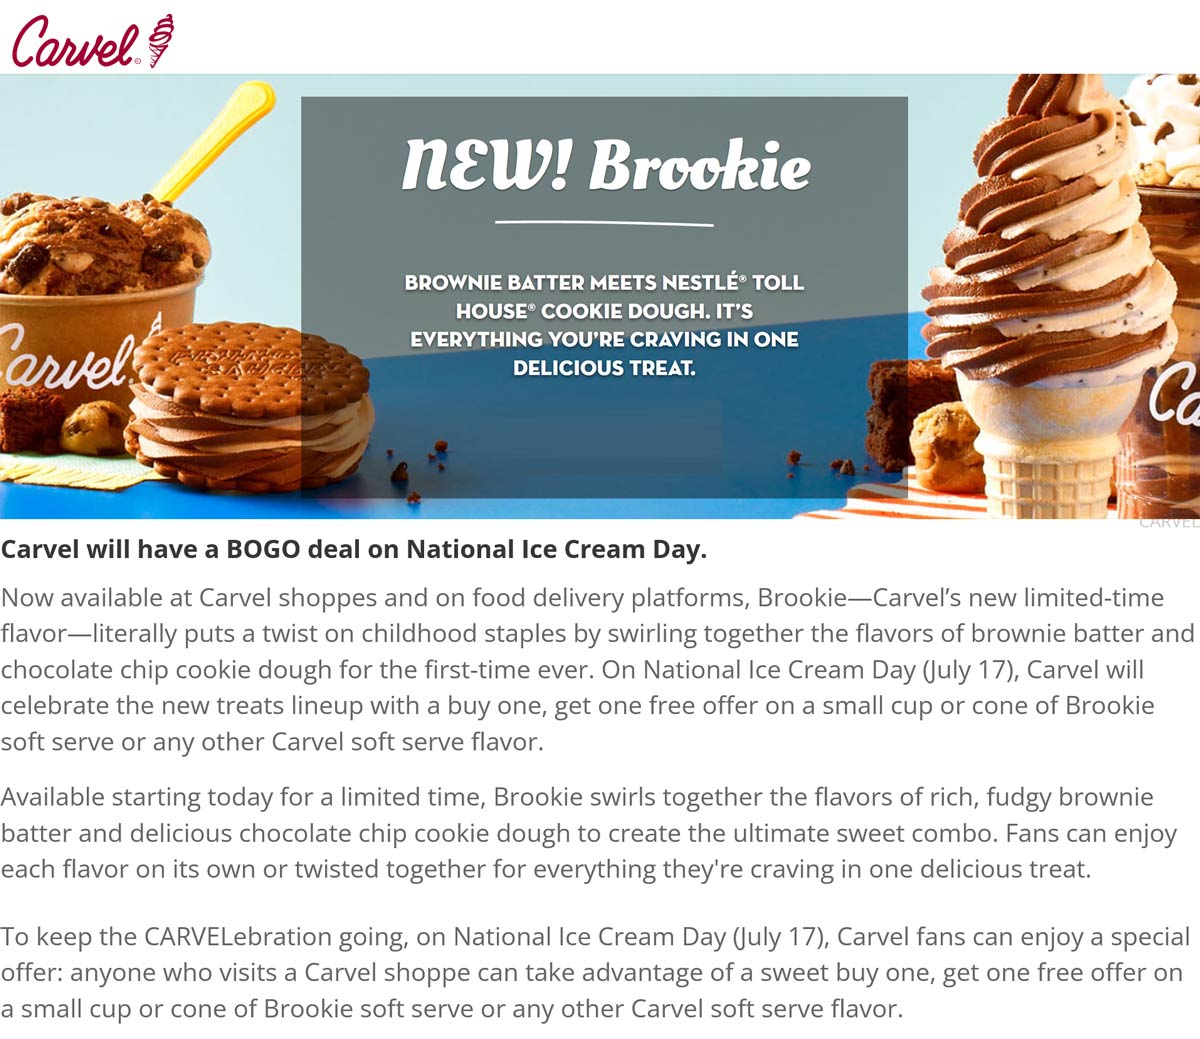 Carvel restaurants Coupon  Second soft serve free today at Carvel ice cream #carvel 